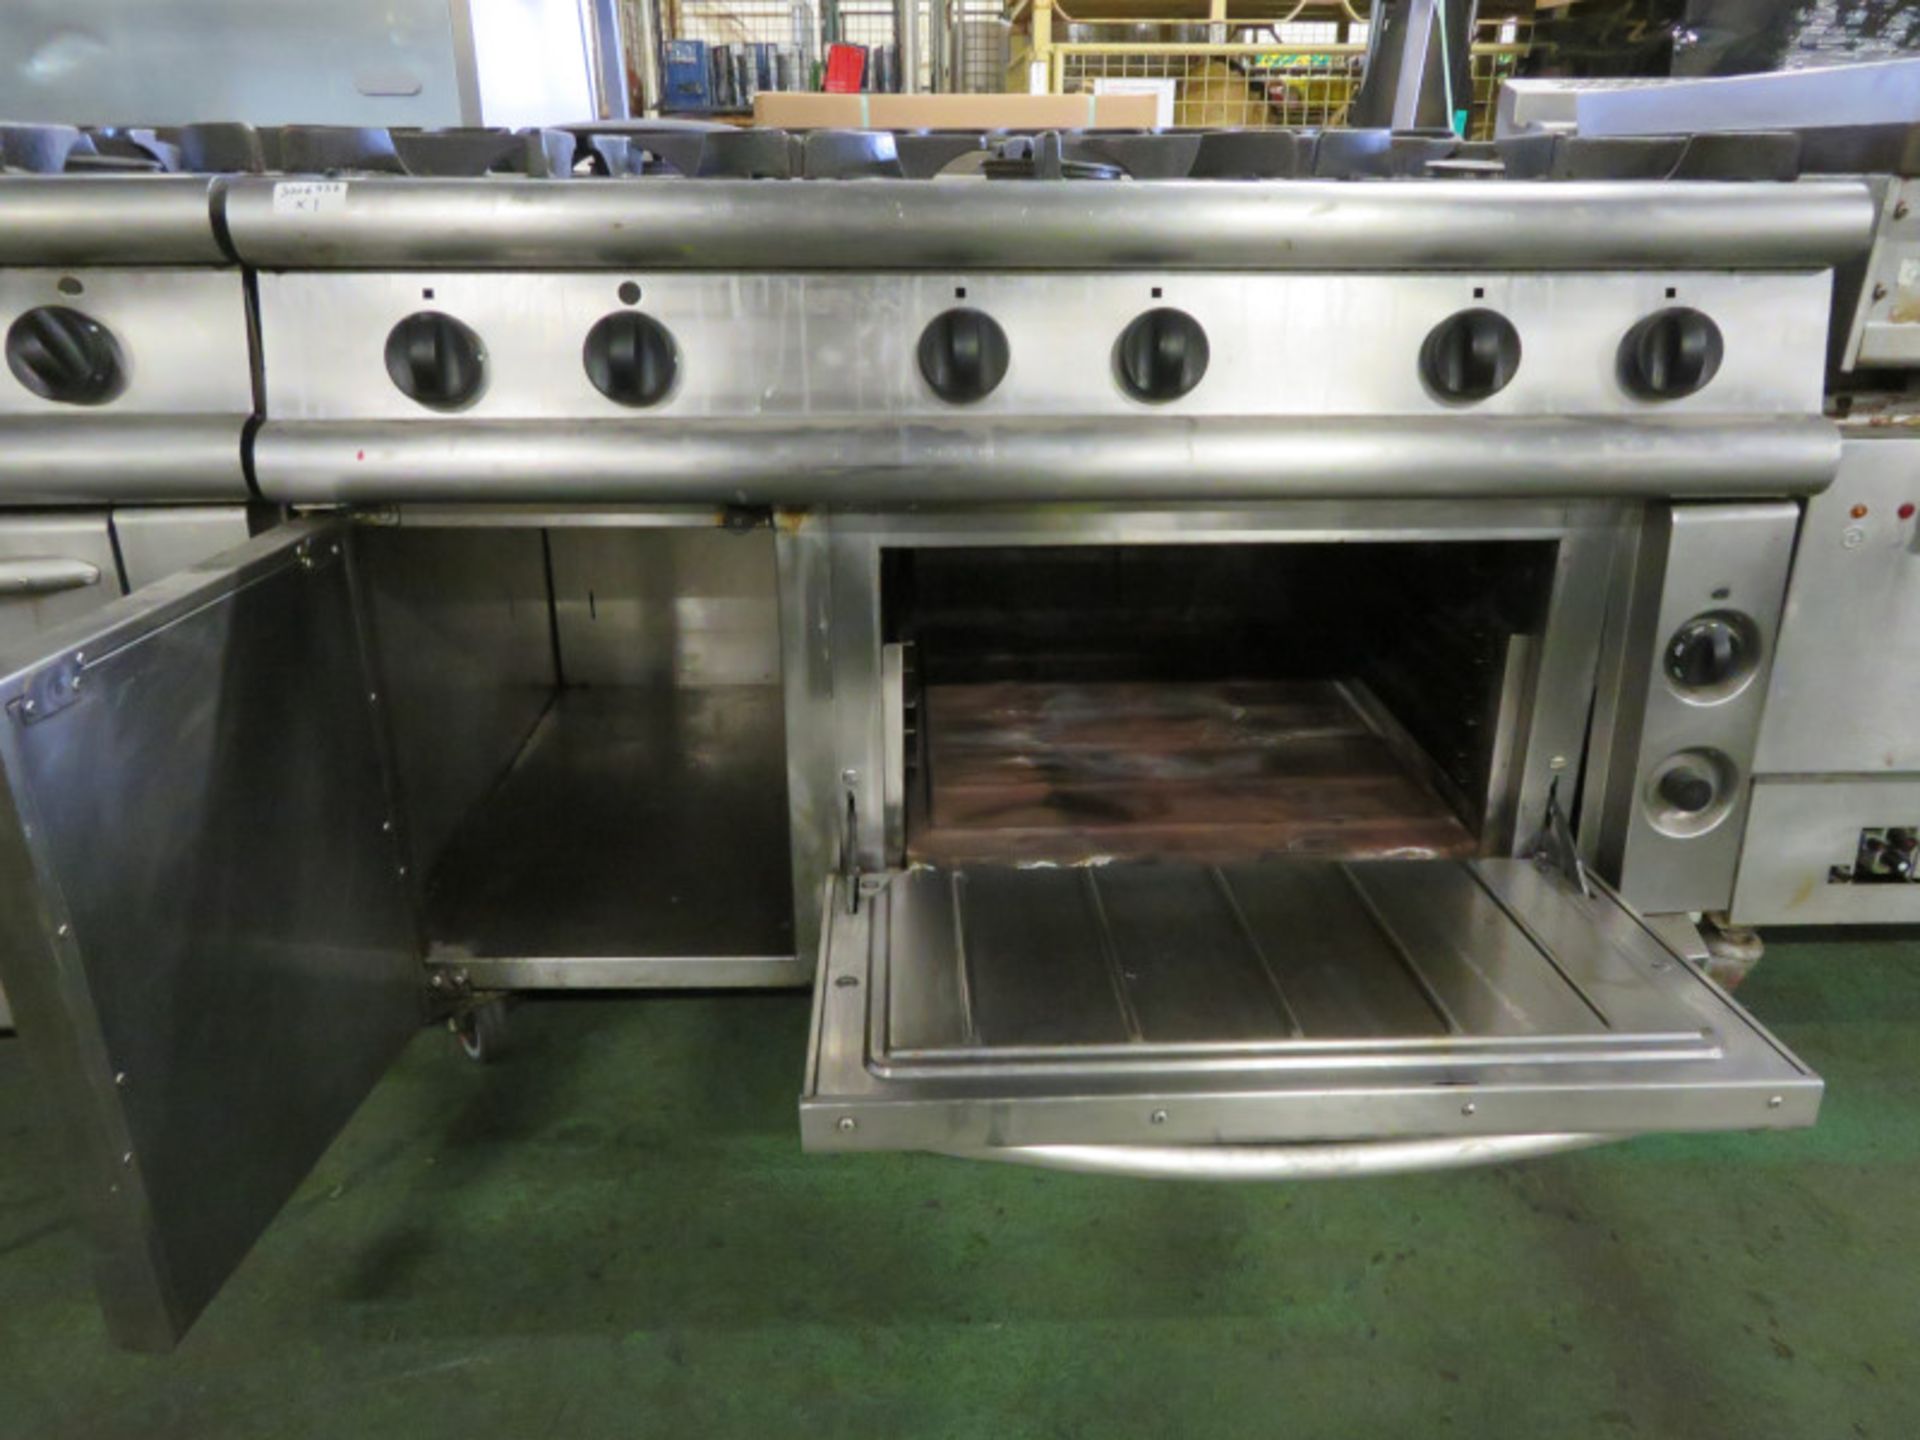 6 Burner Gas Oven Stainless steel L 900mm x W 1200mm x H 930mm - Image 5 of 5